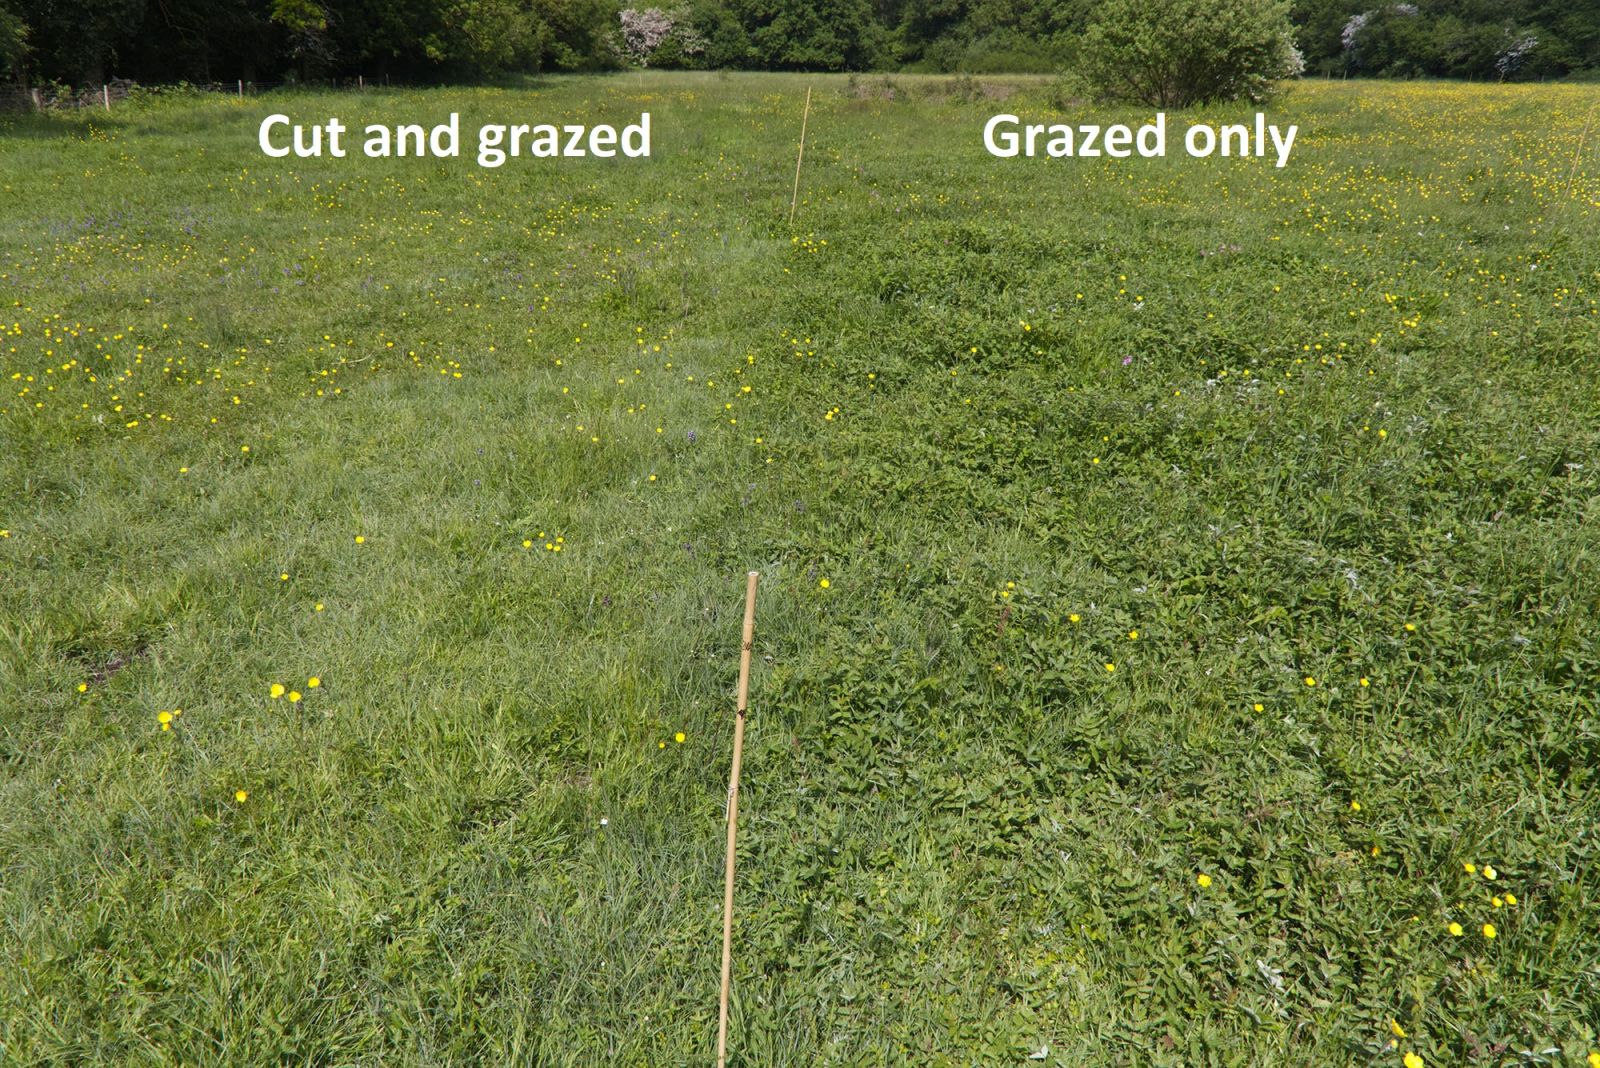 Difference between cut and grazed and grazed only. Photo by Mike Dodd.